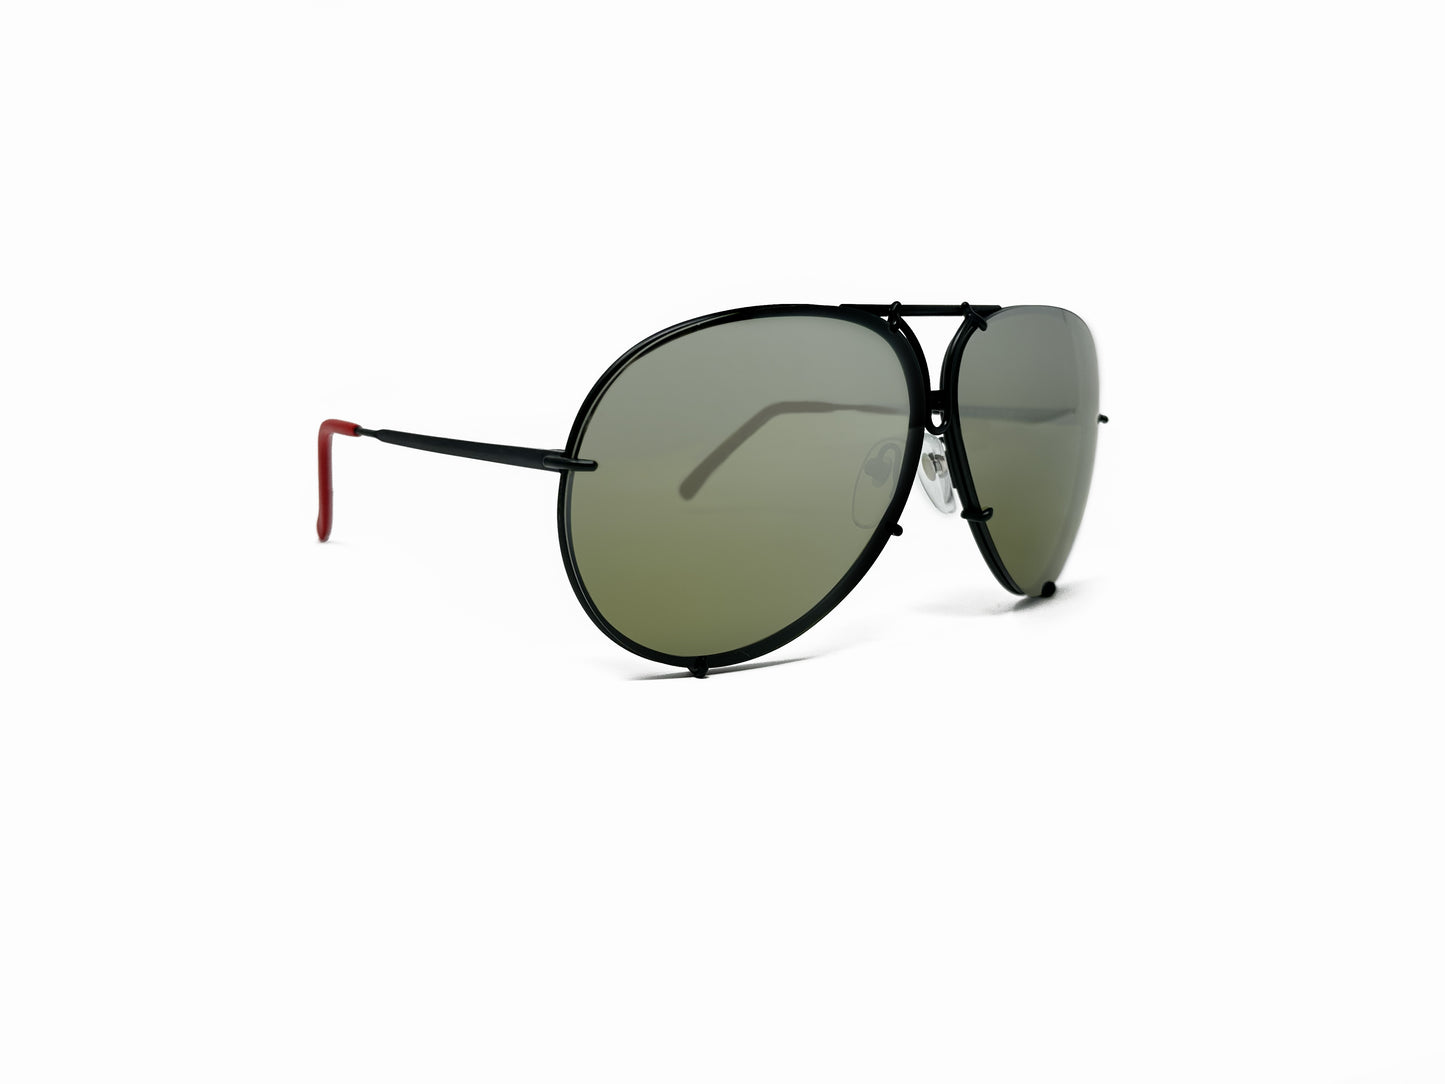 Porsche Design aviator style sunglass. Model: P8478. Color R - black with red temples. Side view.